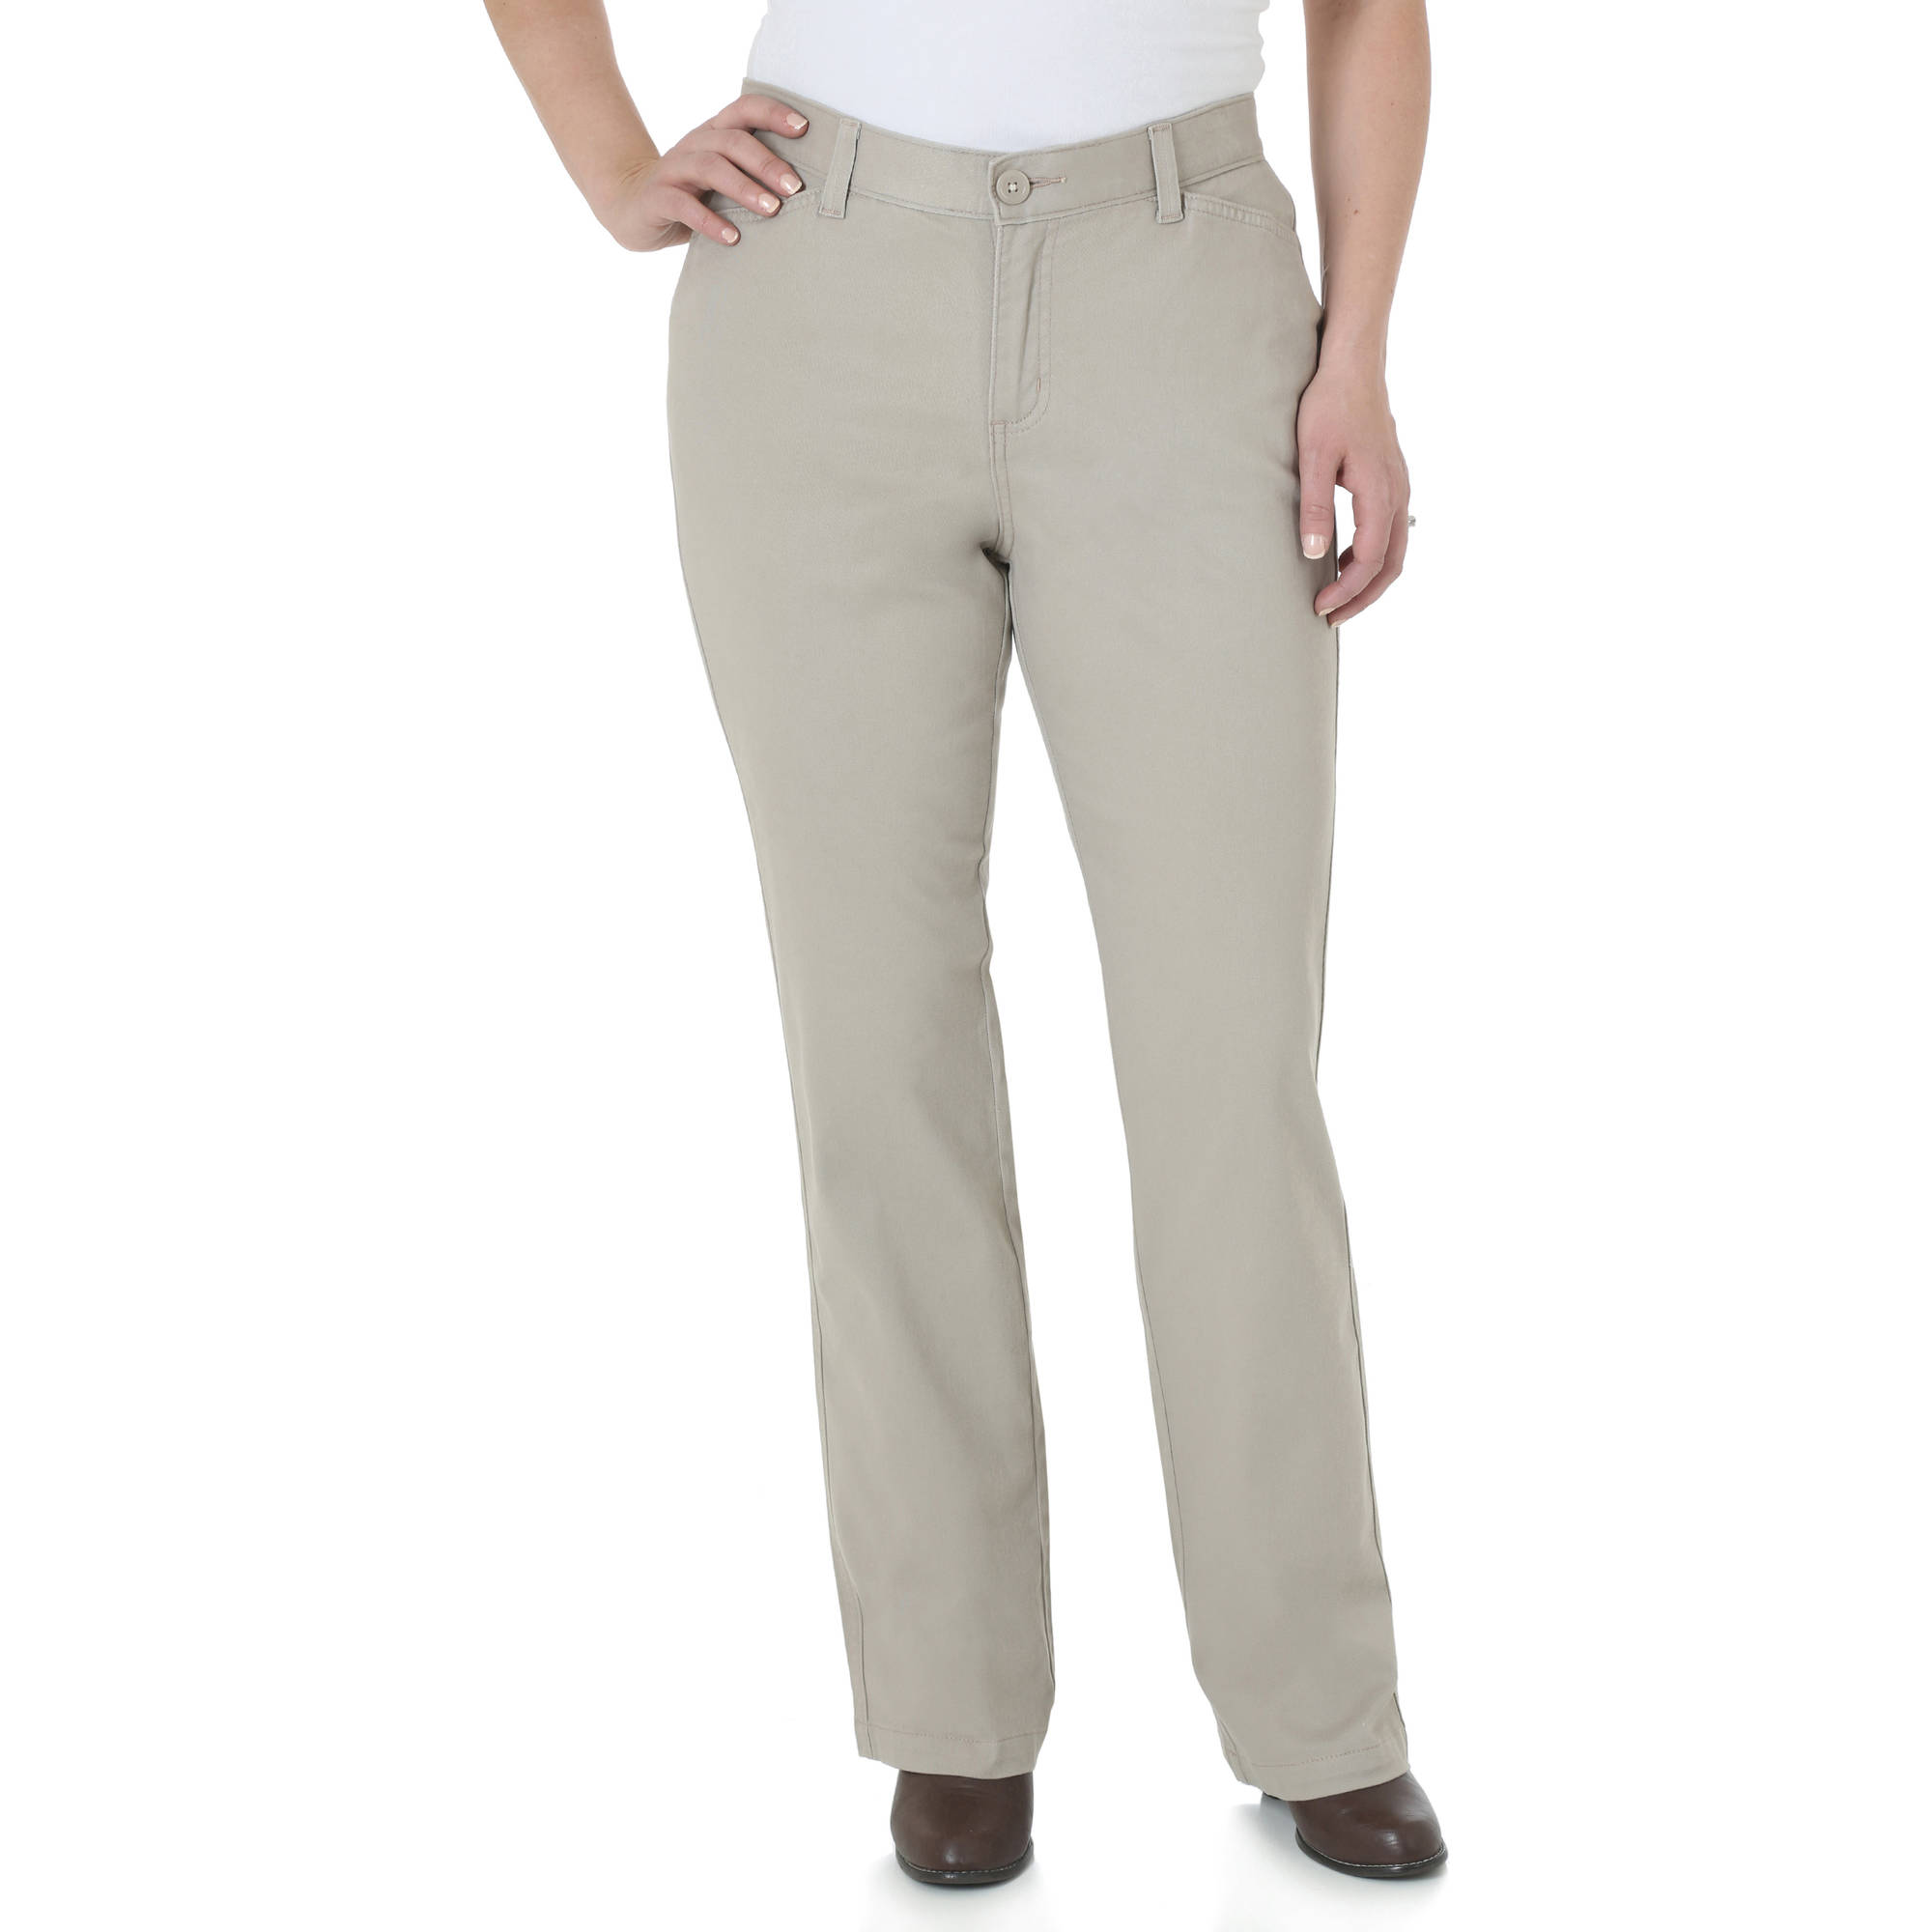 The Women's Classic Straight Leg Stretch Woven Pants Available in Regular, Petite, and Long Lengths - image 1 of 1